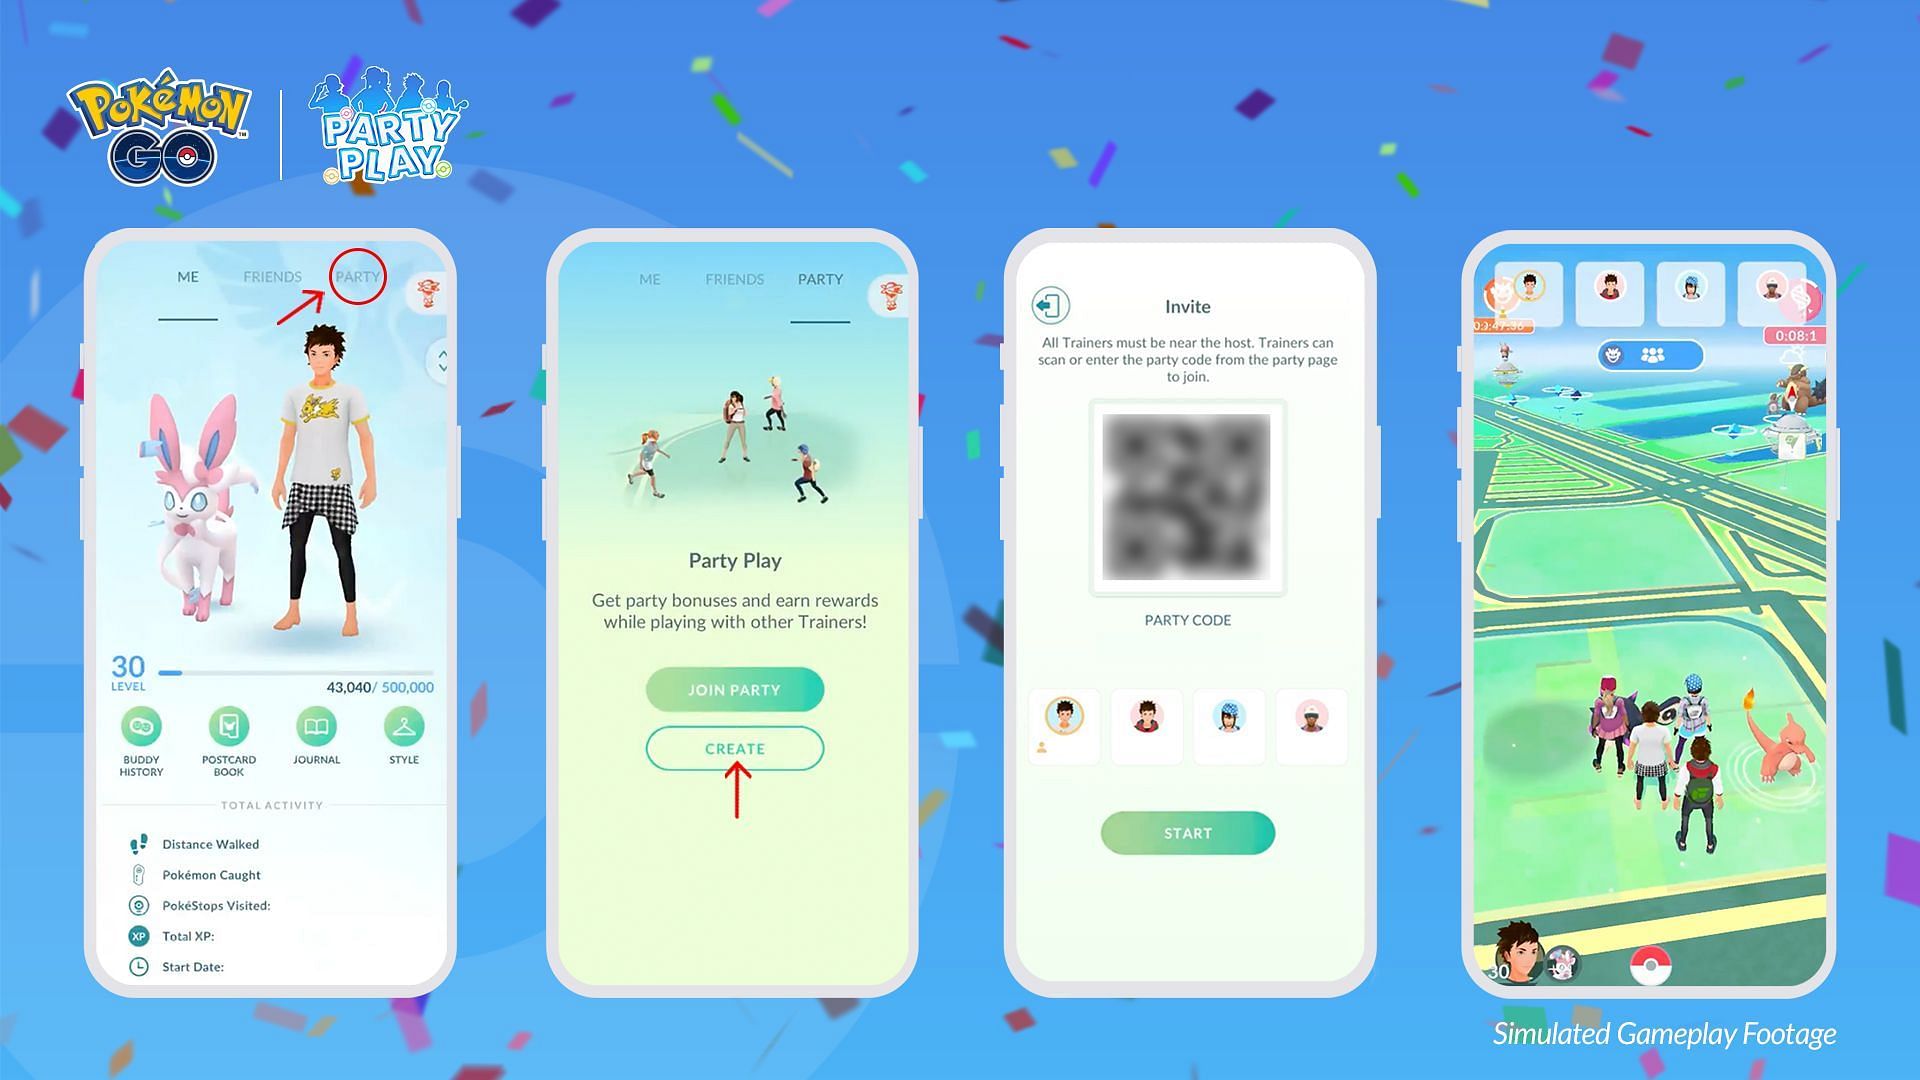 How to create a Party (Image via Niantic)